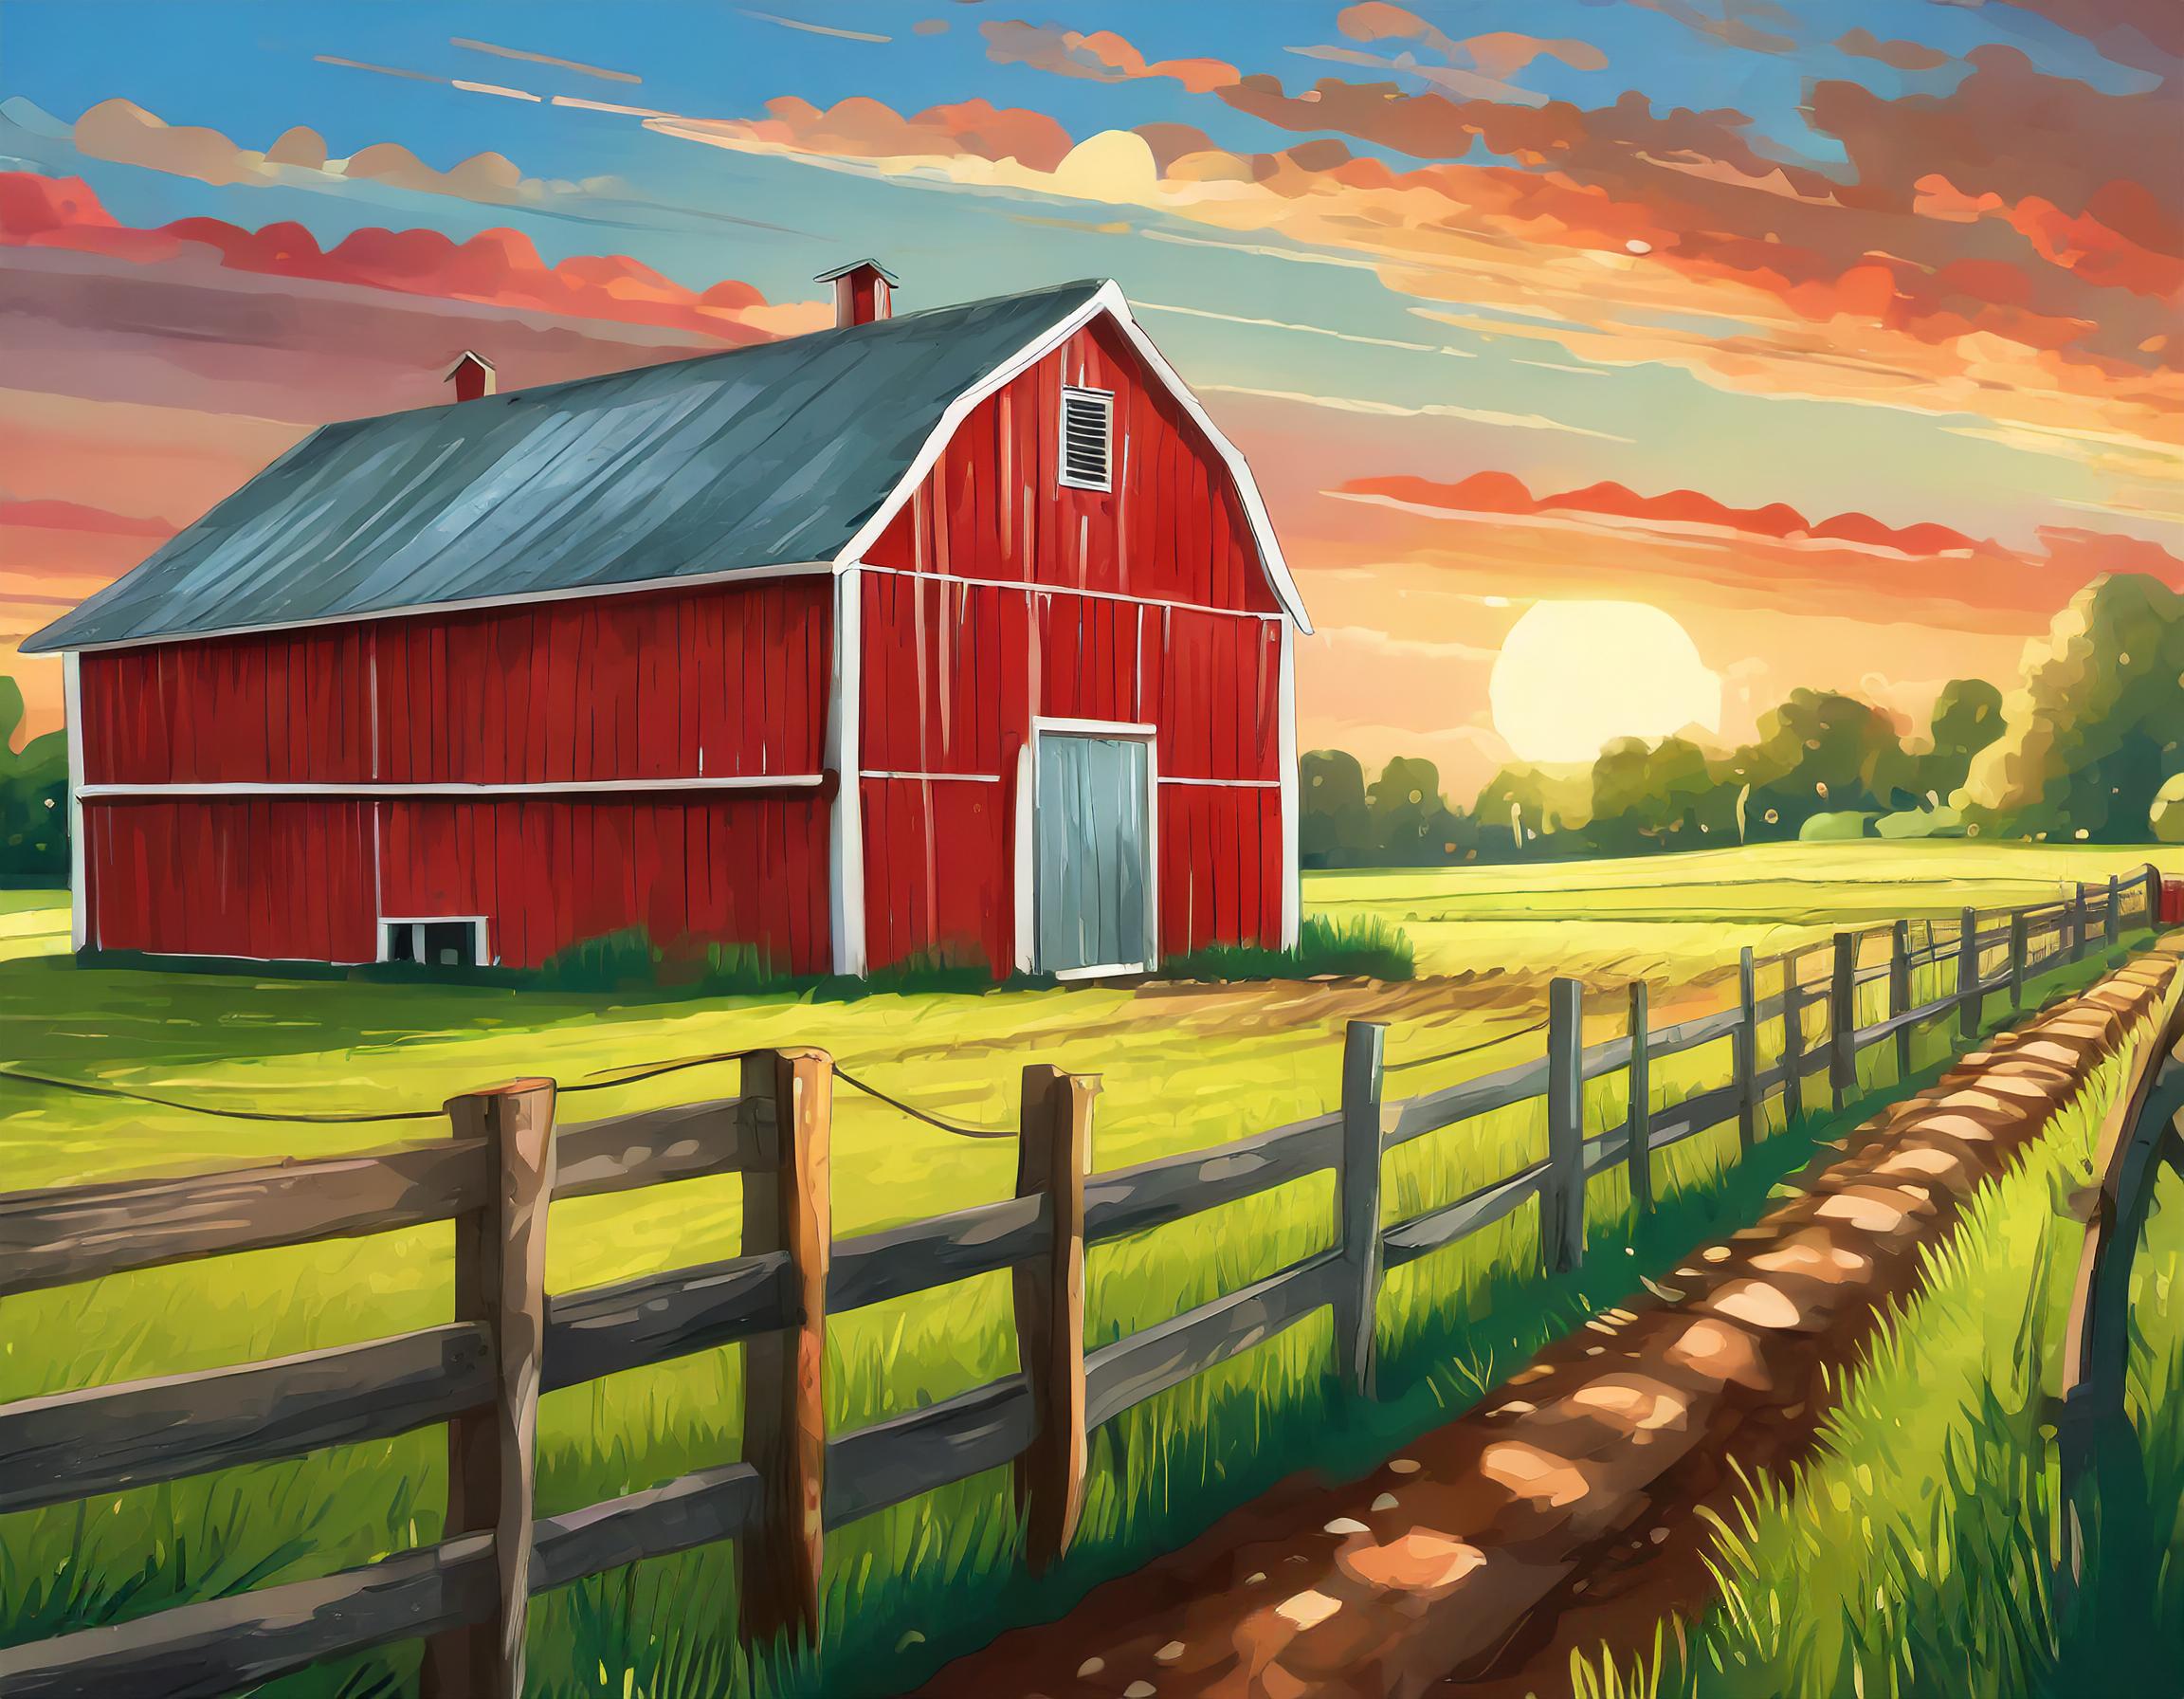 The photograph captures a picturesque scene of a quintessential American red barn nestled amidst a rural landscape. Standing proudly against a backdrop of lush green fields and vibrant trees, the barn exudes a timeless charm. Its weathered wooden exterior, painted in a classic shade of rustic red, reflects the rich agricultural heritage of the countryside. The barn's architecture is simple yet elegant, featuring a gabled roof with a slight overhang and a traditional gambrel design. A pair of large wooden doors, painted in the same red hue as the rest of the structure, are closed shut, hinting at the valuable treasures stored within. As the sunlight gently bathes the scene, shadows play across the barn's surface, accentuating its texture and adding depth to the image. The play of light and shadow highlights the craftsmanship of the barn's construction, showcasing the intricate details of its wooden siding and sturdy support beams. Surrounding the barn, the landscape stretches out in all directions, with rolling hills and meadows extending to the horizon. In the distance, a cluster of trees rises against the sky, their leaves shimmering in the sunlight. Overall, the photograph captures the timeless beauty and pastoral serenity of rural life, inviting viewers to immerse themselves in the idyllic charm of the countryside.